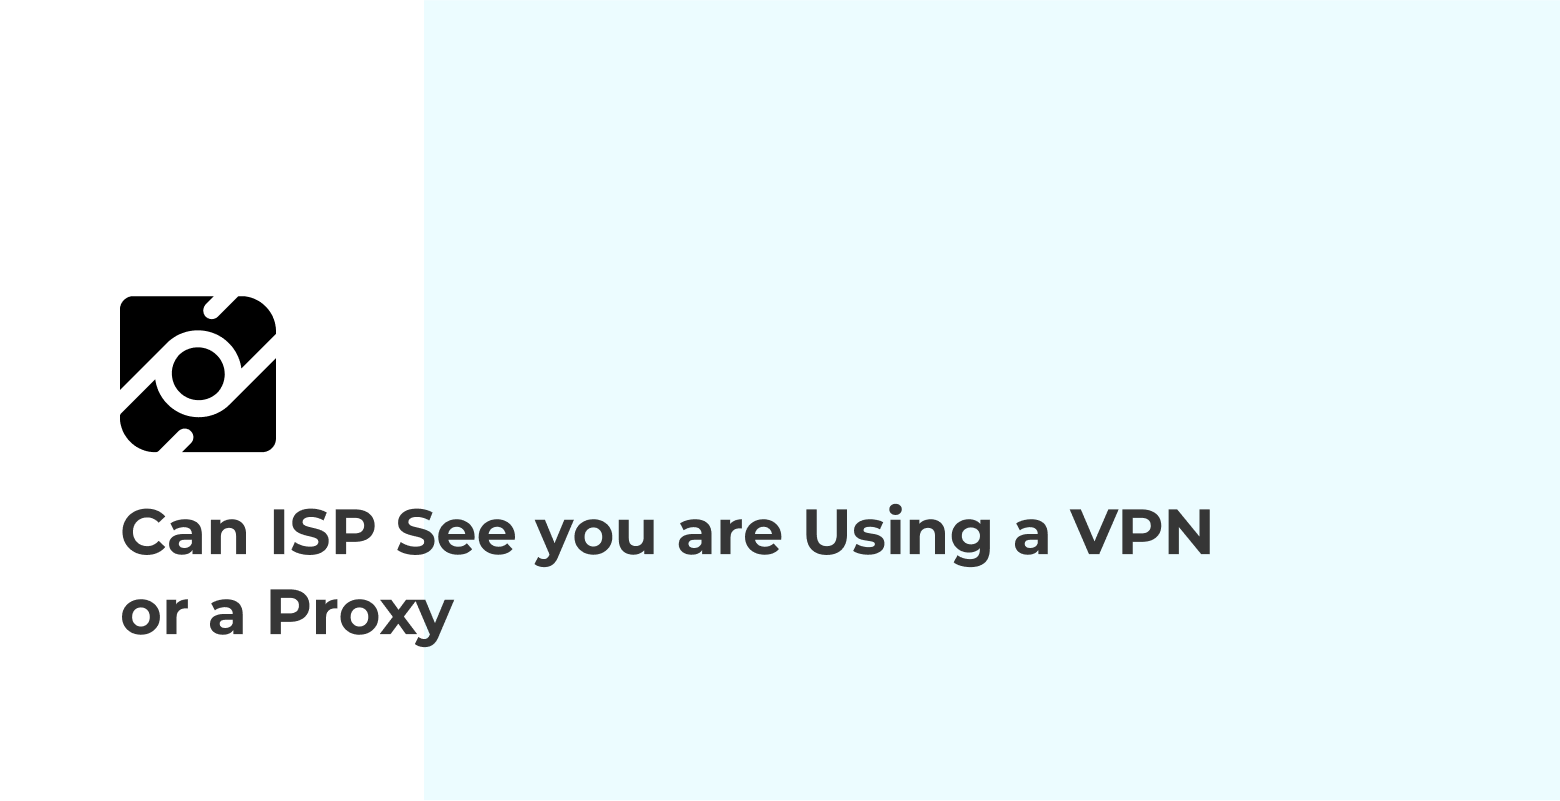 Can ISP See you are Using a VPN or a Proxy